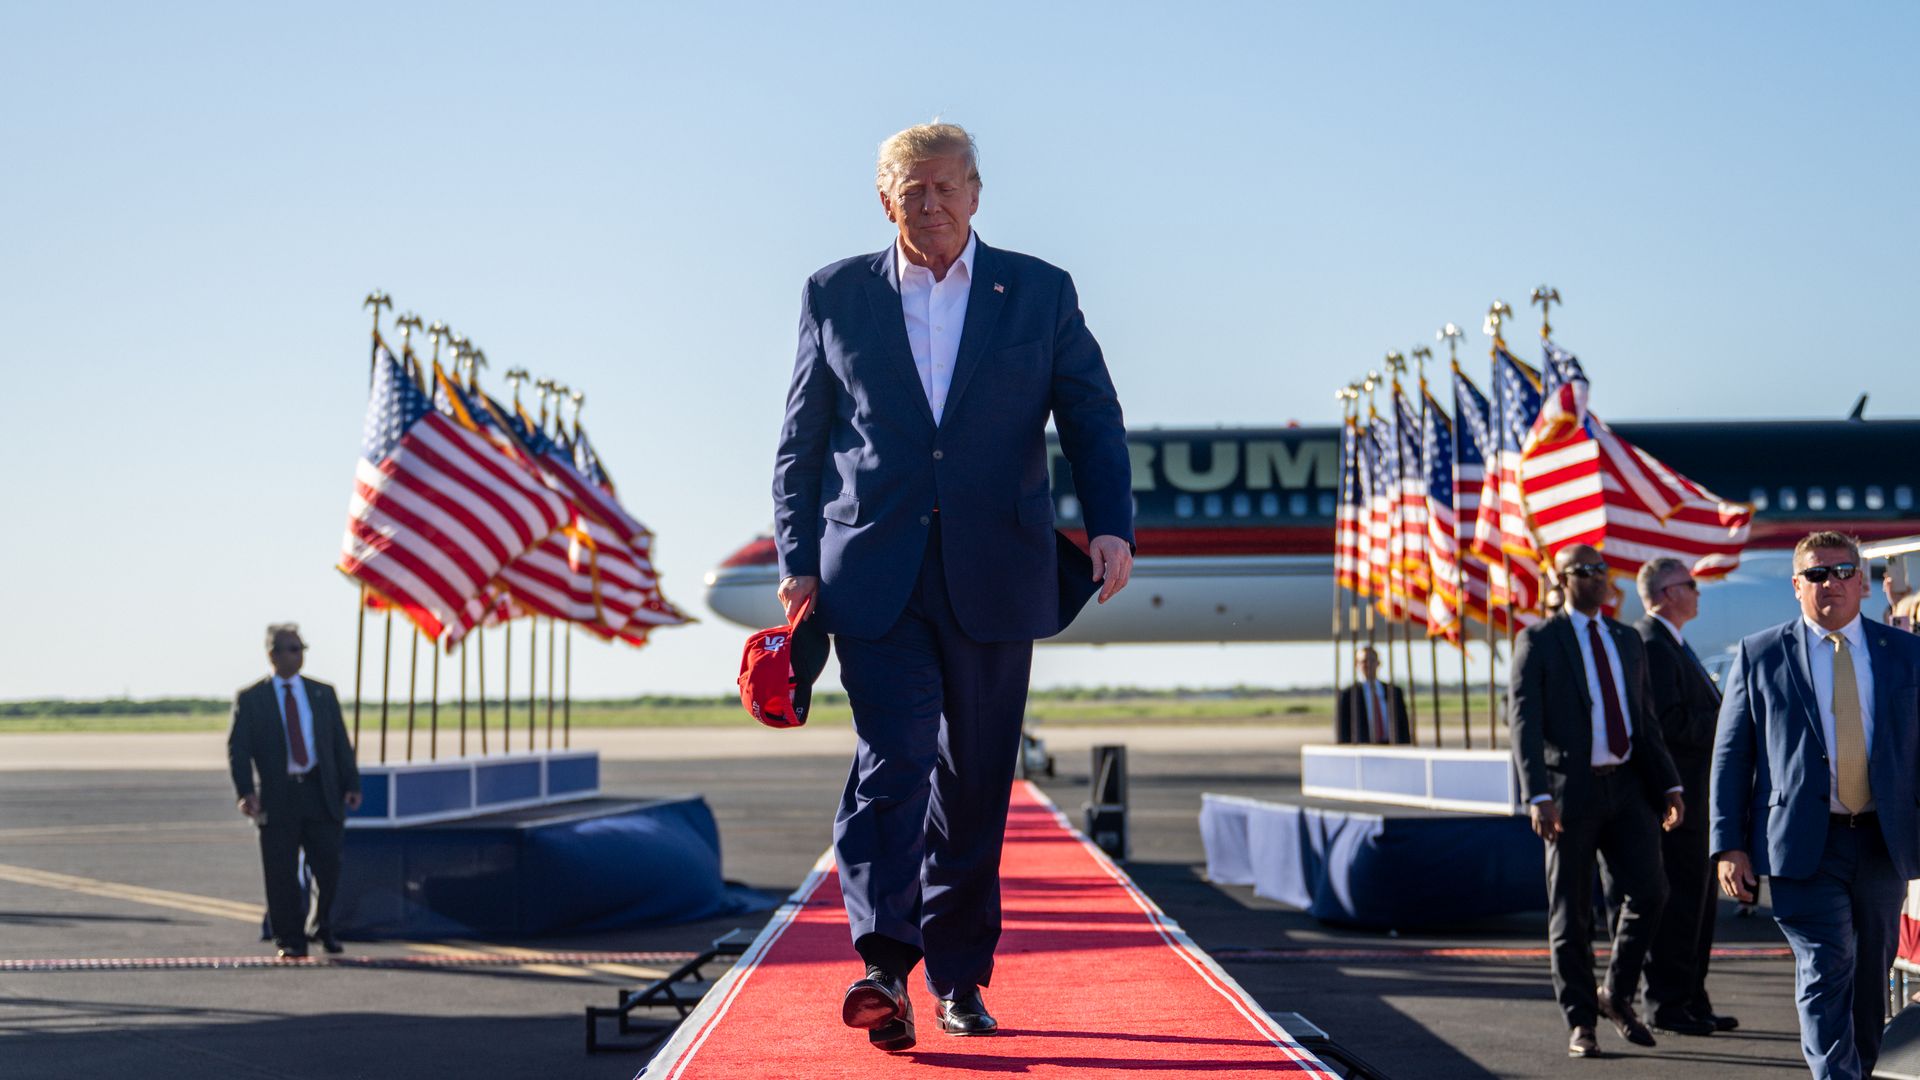 Former U.S. President Donald Trump arrives during a rally at the Waco Regional Airport on March 25, 2023 in Waco, Texas. 